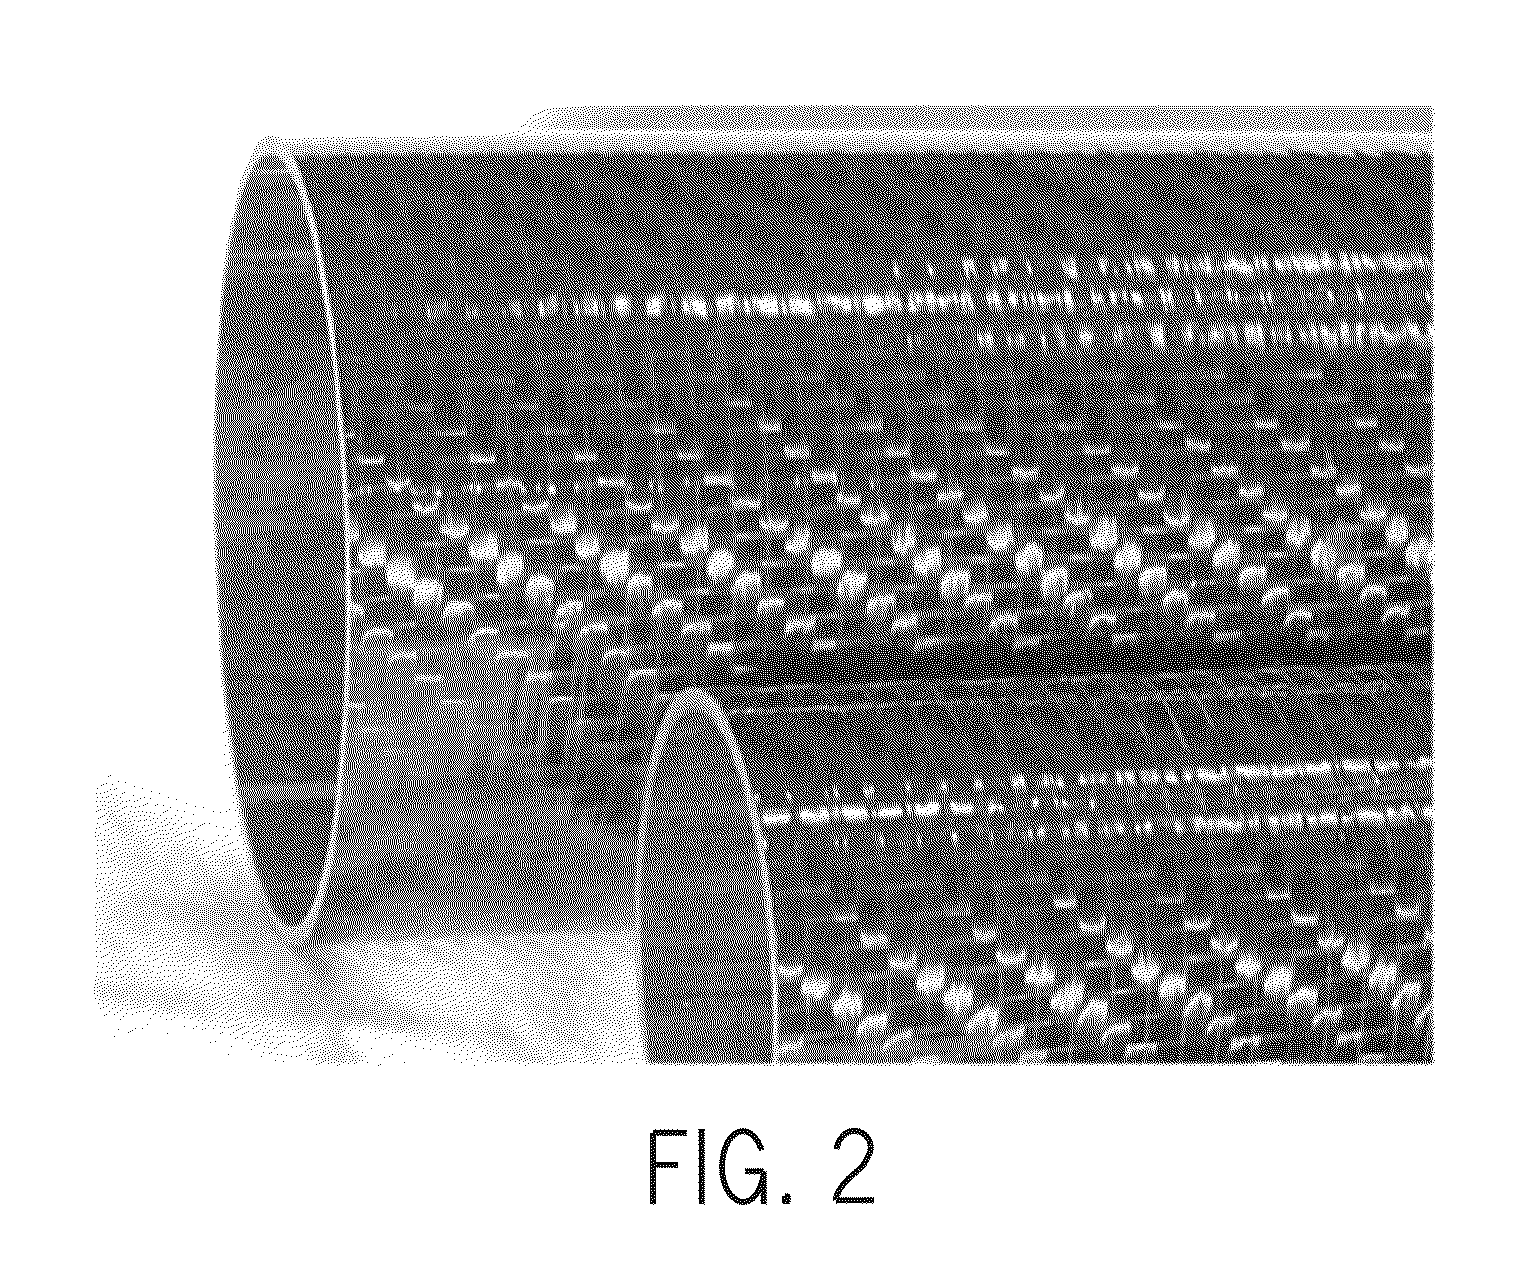 Inflatable and rigidizable support element